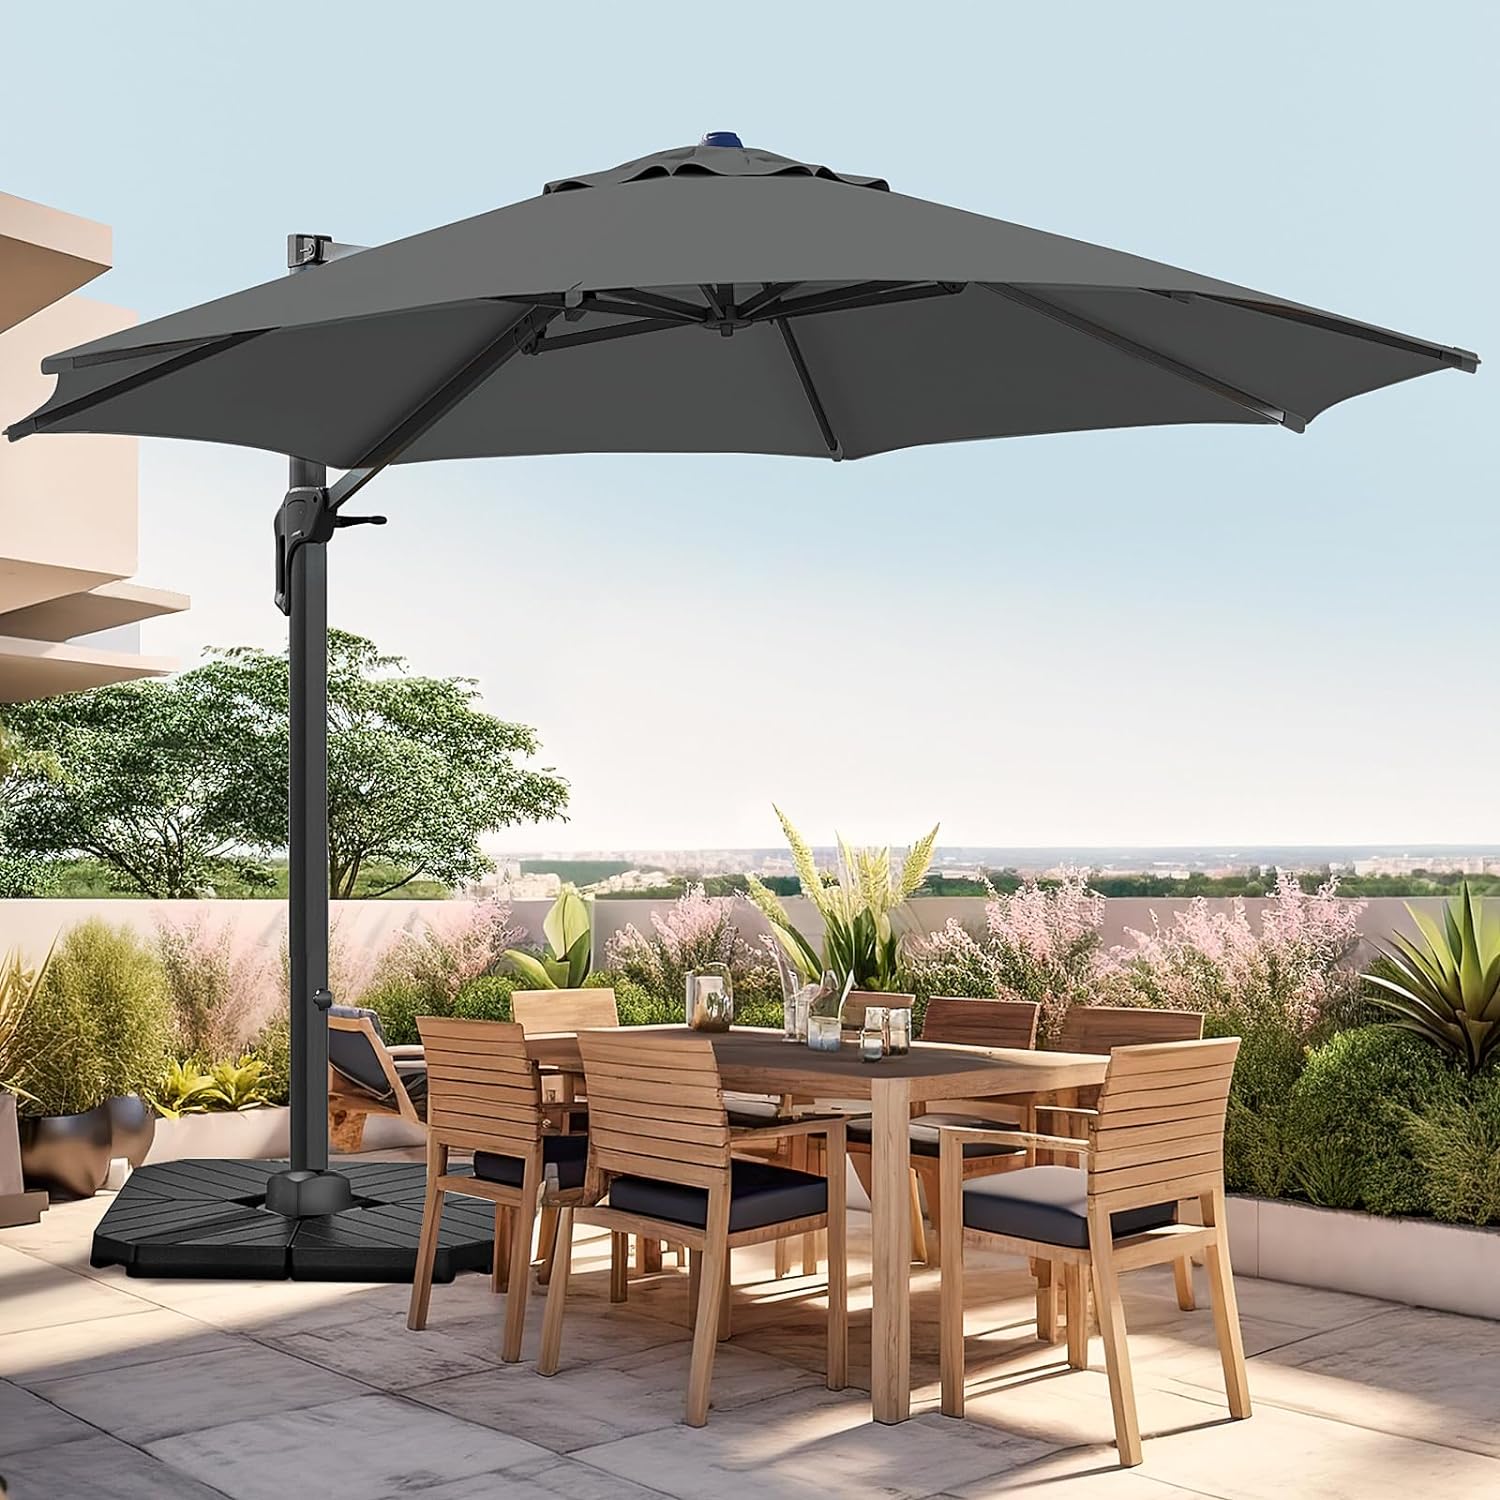 wikiwiki 12 FT Cantilever Patio Umbrellas Outdoor Large Offset Umbrella w/ 36 Month Fade Resistance Recycled Fabric, 6-Level 360Rotation Aluminum Pole for Deck Pool Garden, Grey